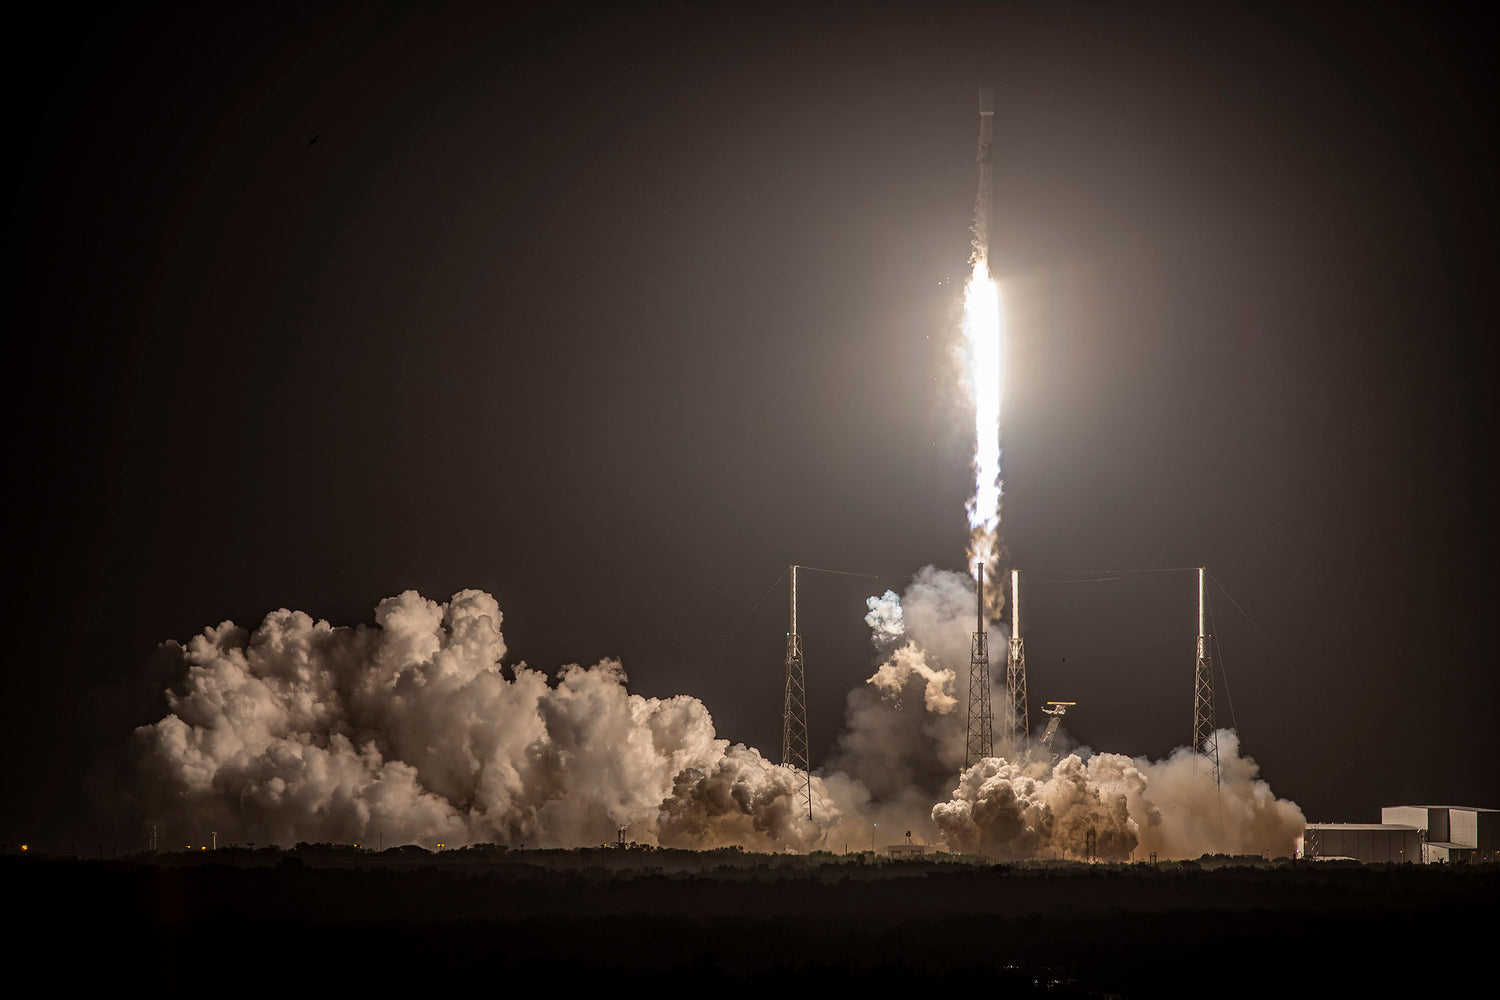 SpaceX Falcon 9 lifts off an eighth time to launch internet-beaming Starlink satellites